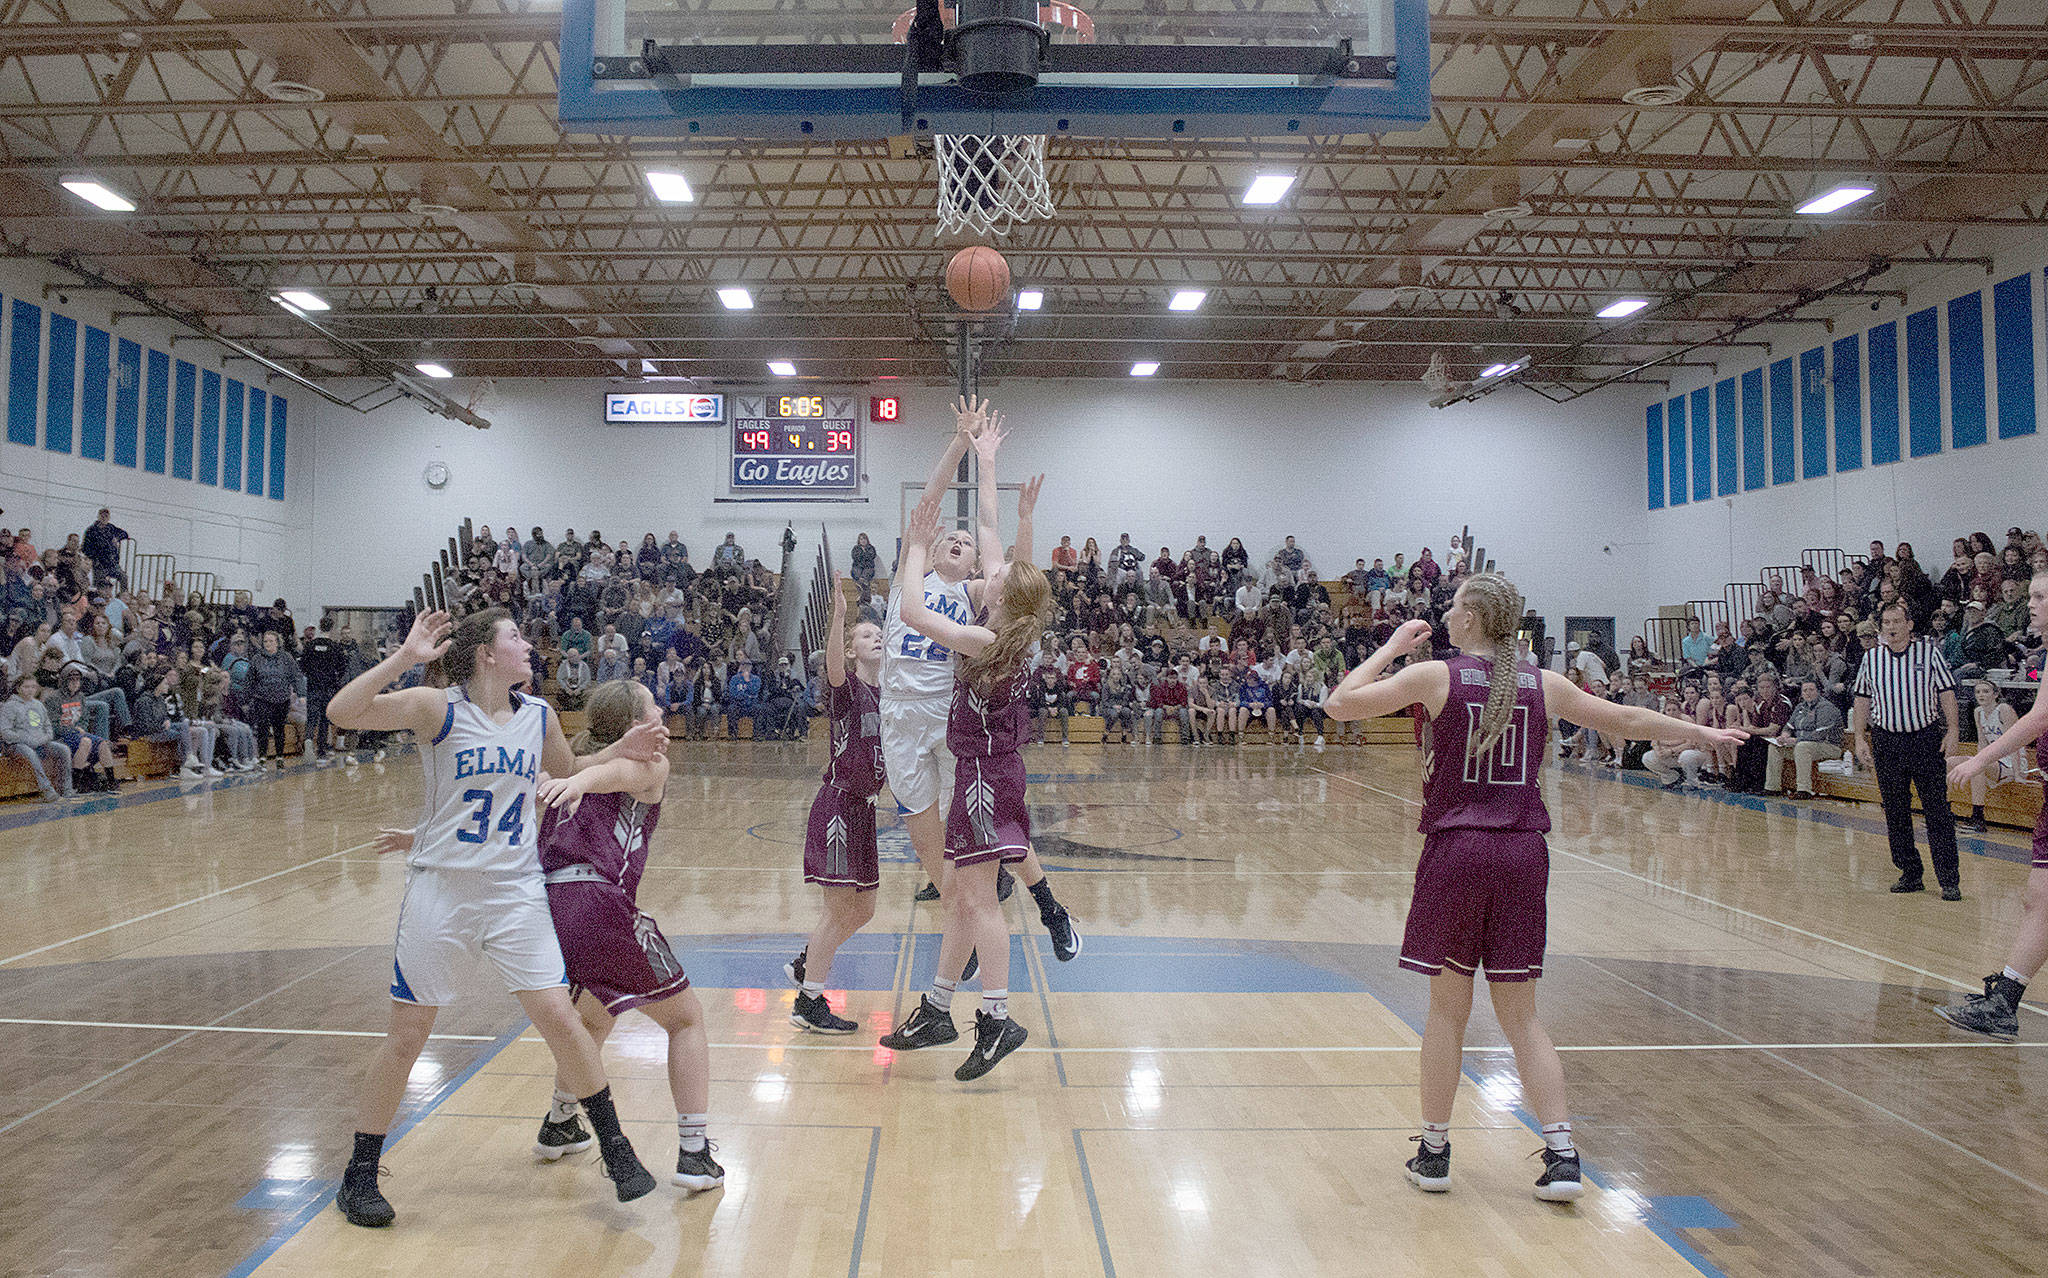 Elma’s Quin Mikel puts up a shot against Montesano in an Evergreen 1A League contest on Thursday. Mikel finished with 22 points in the 60-50 win over the Bulldogs. (Brendan Carl Photography)